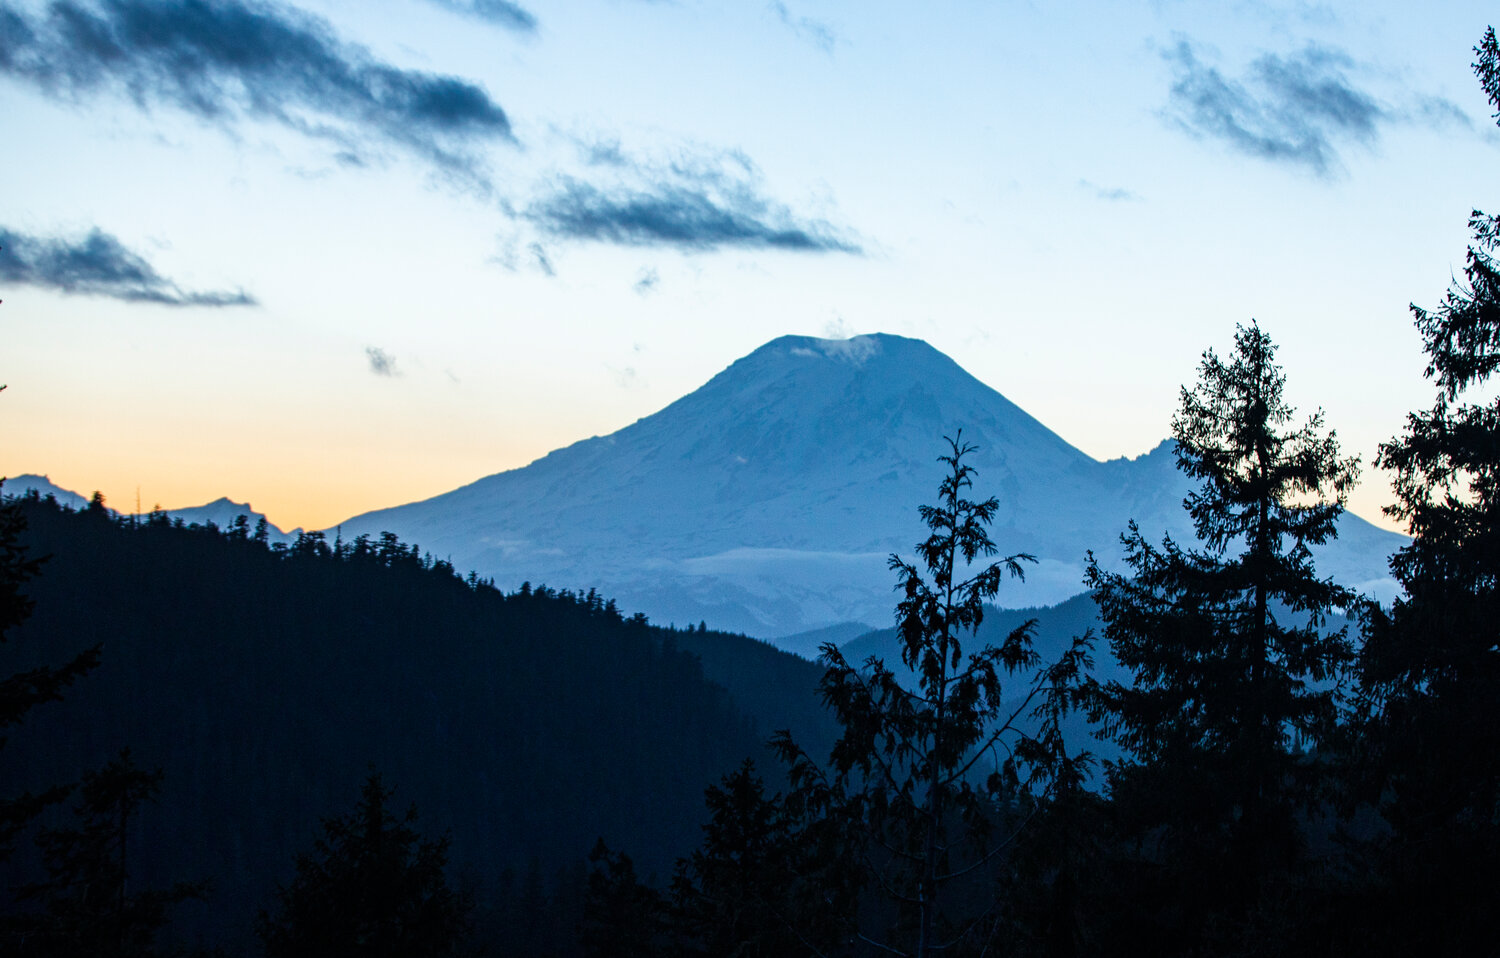 The sun sets behind Mount Rainier as seen from U.S. Highway 12 near White Pass on Saturday.